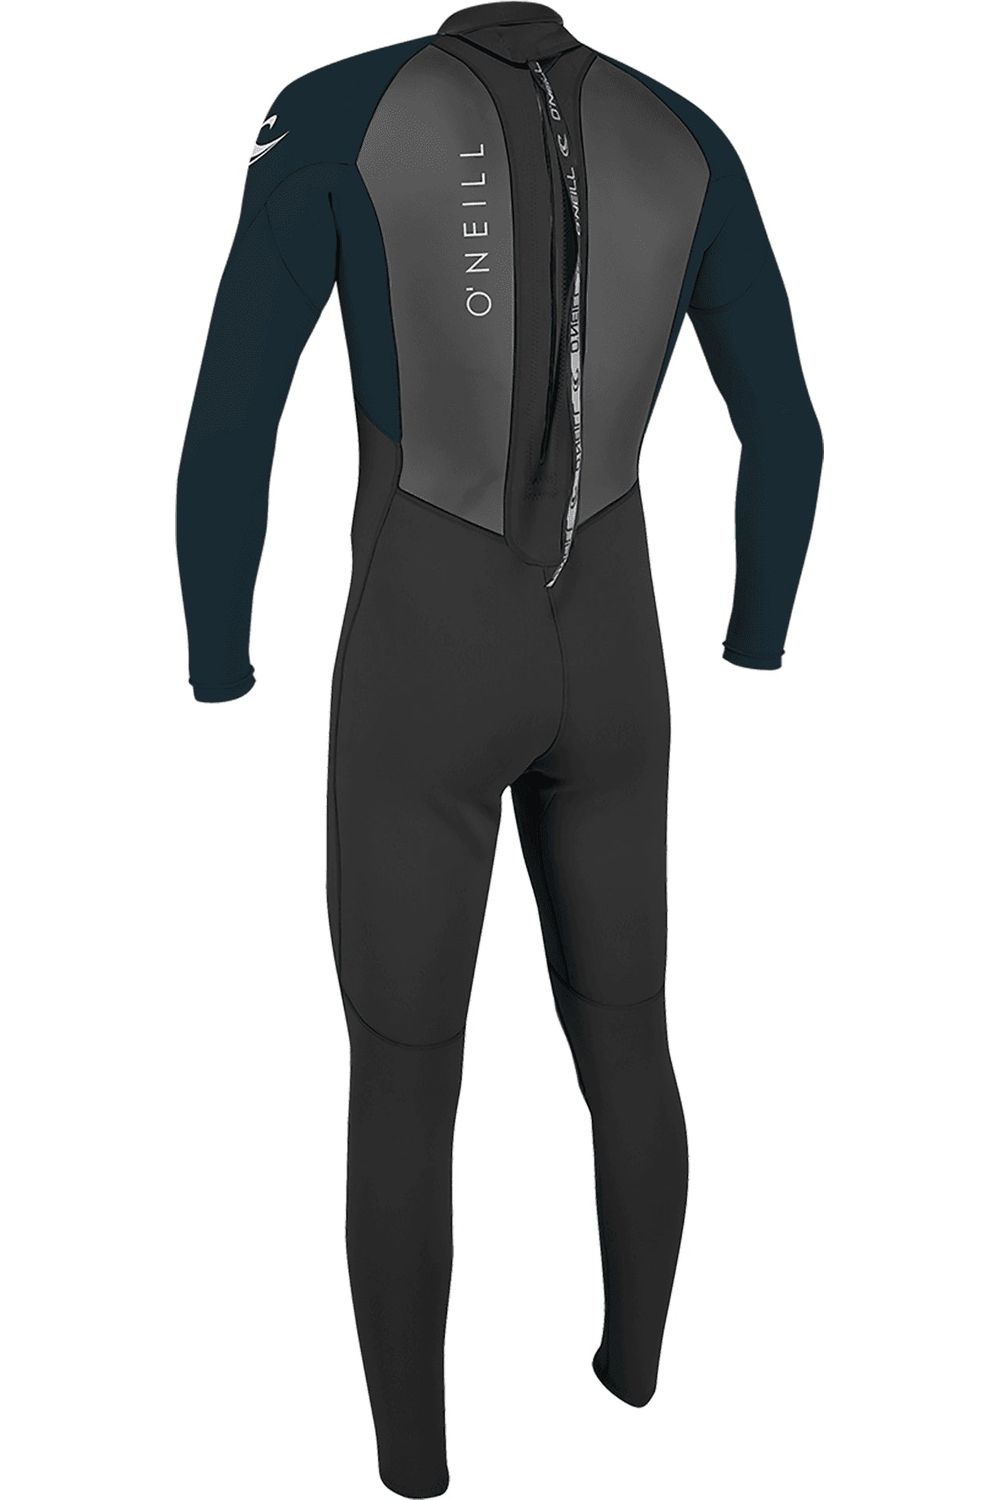 O'Neill Reactor 2 Wetsuit 3/2 With Back Zip In Black Abyss